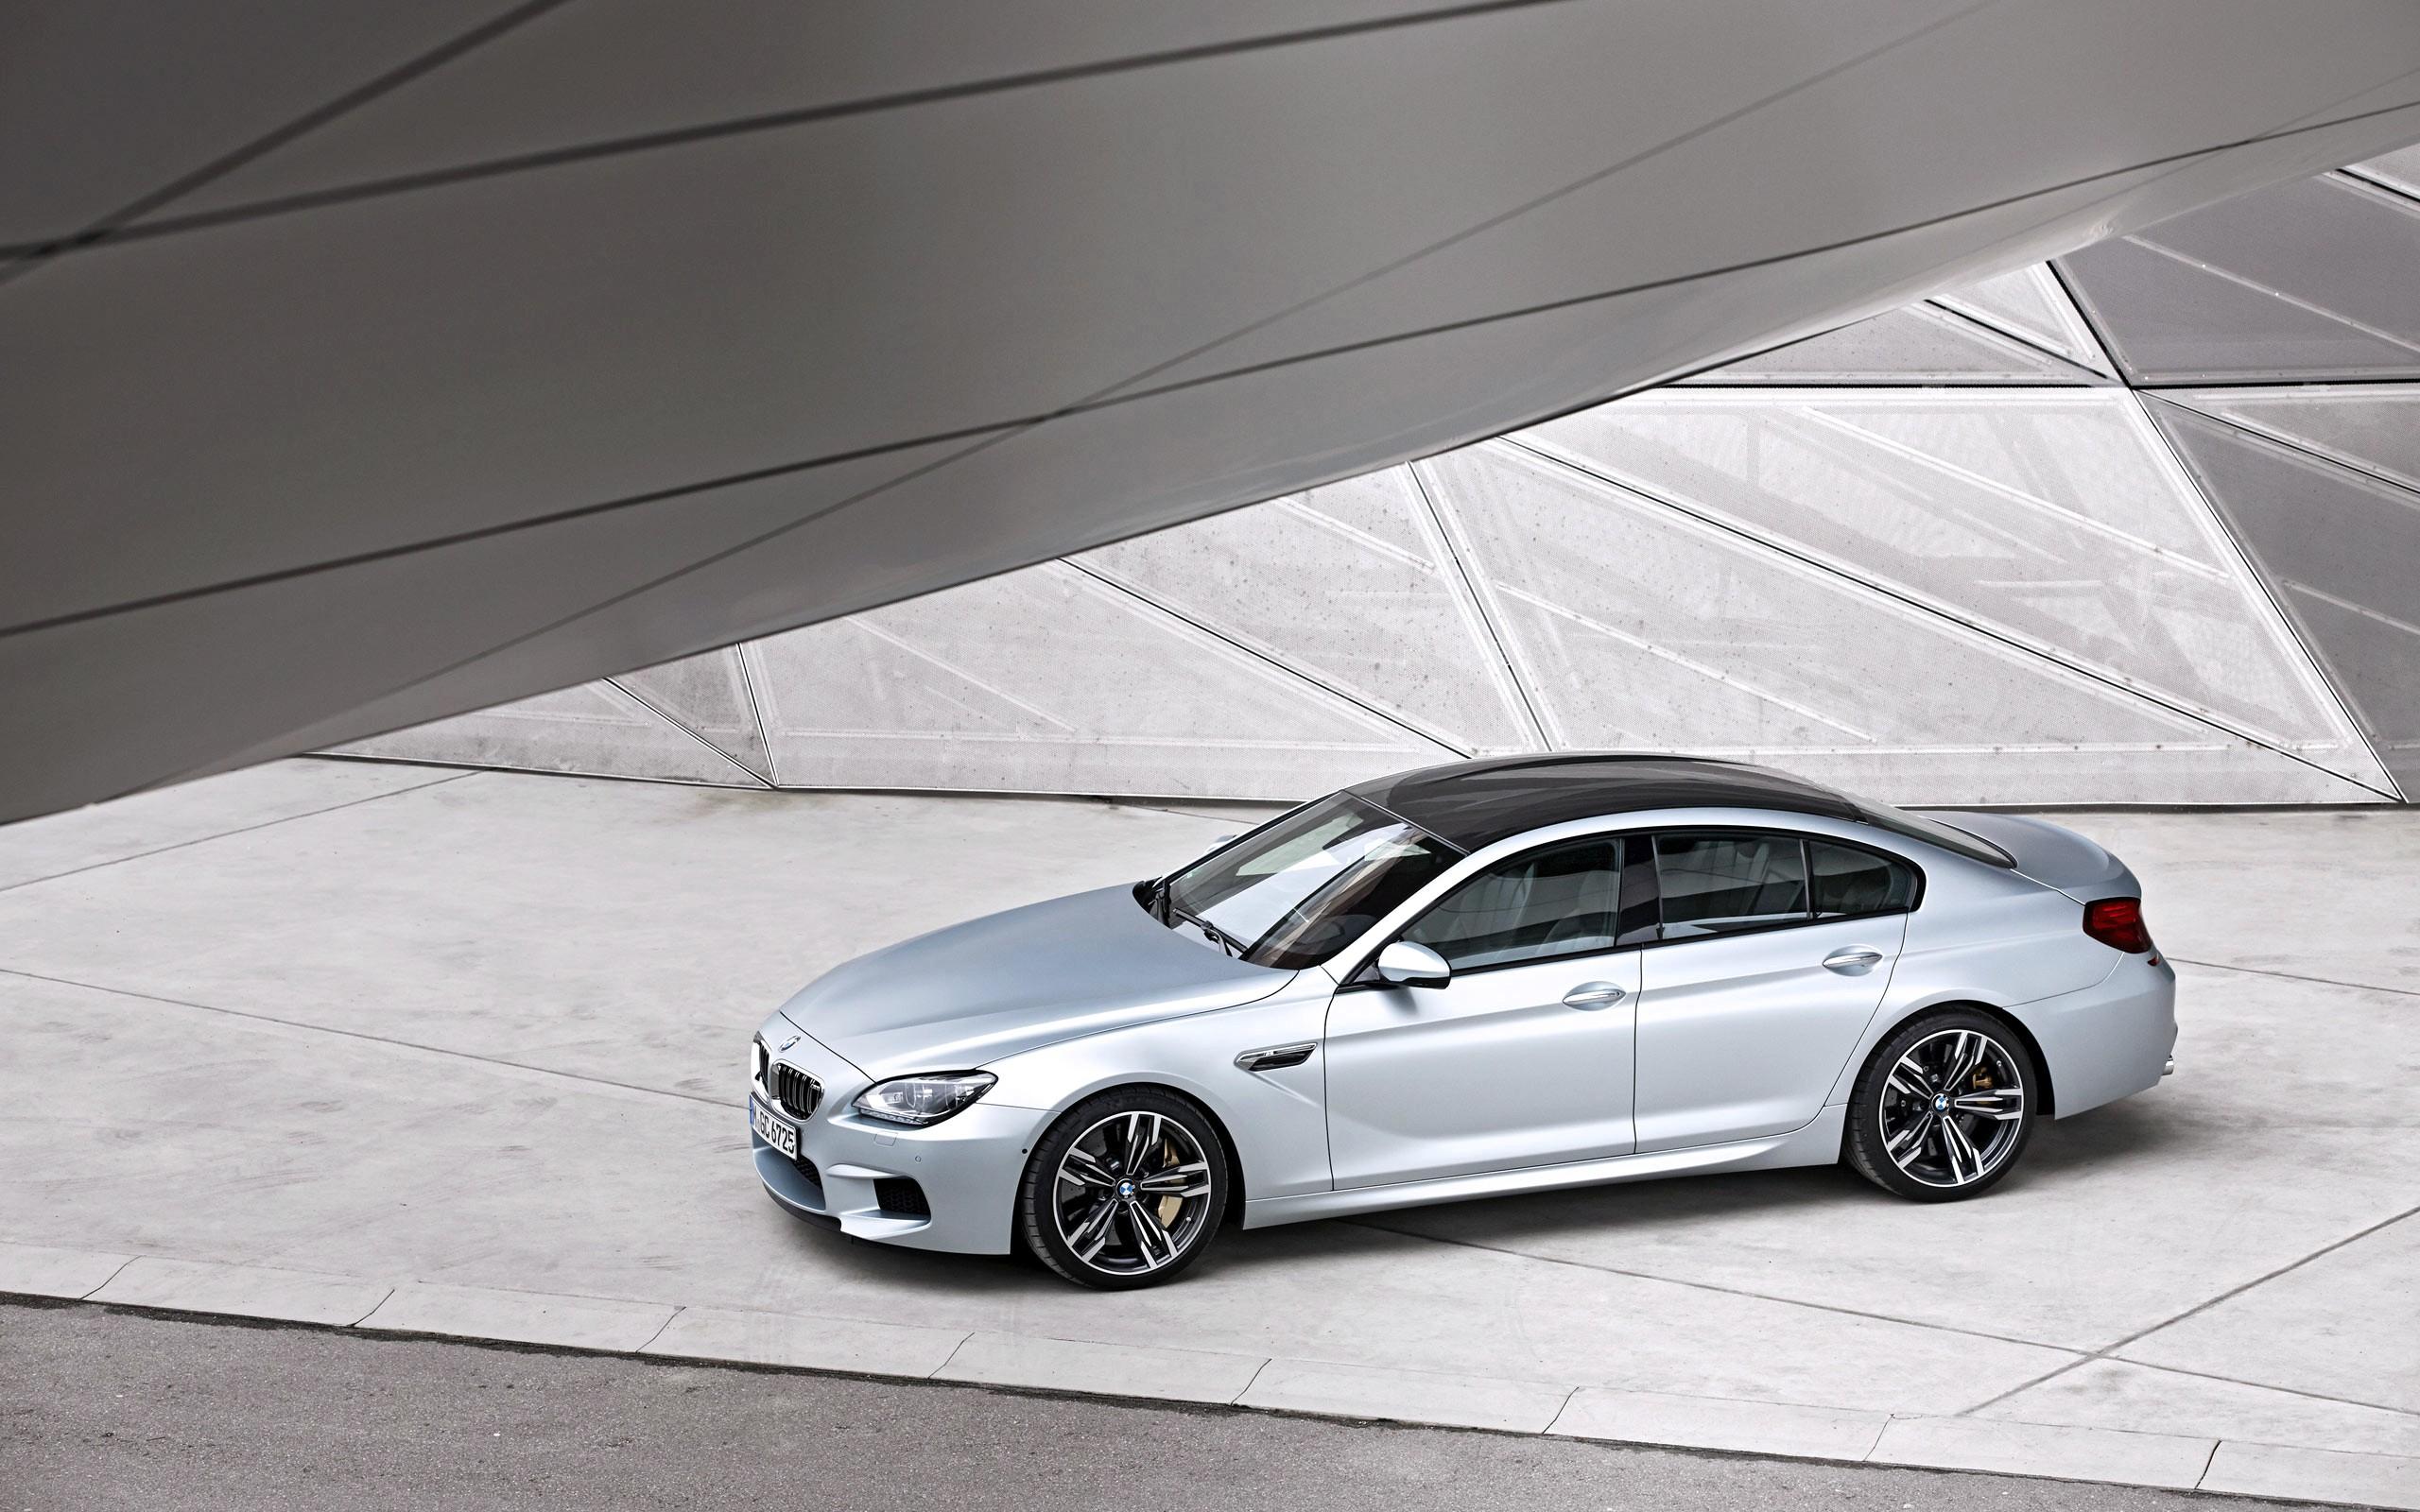 Daily Wallpaper: BMW M6 Gran Coupe. I Like To Waste My Time